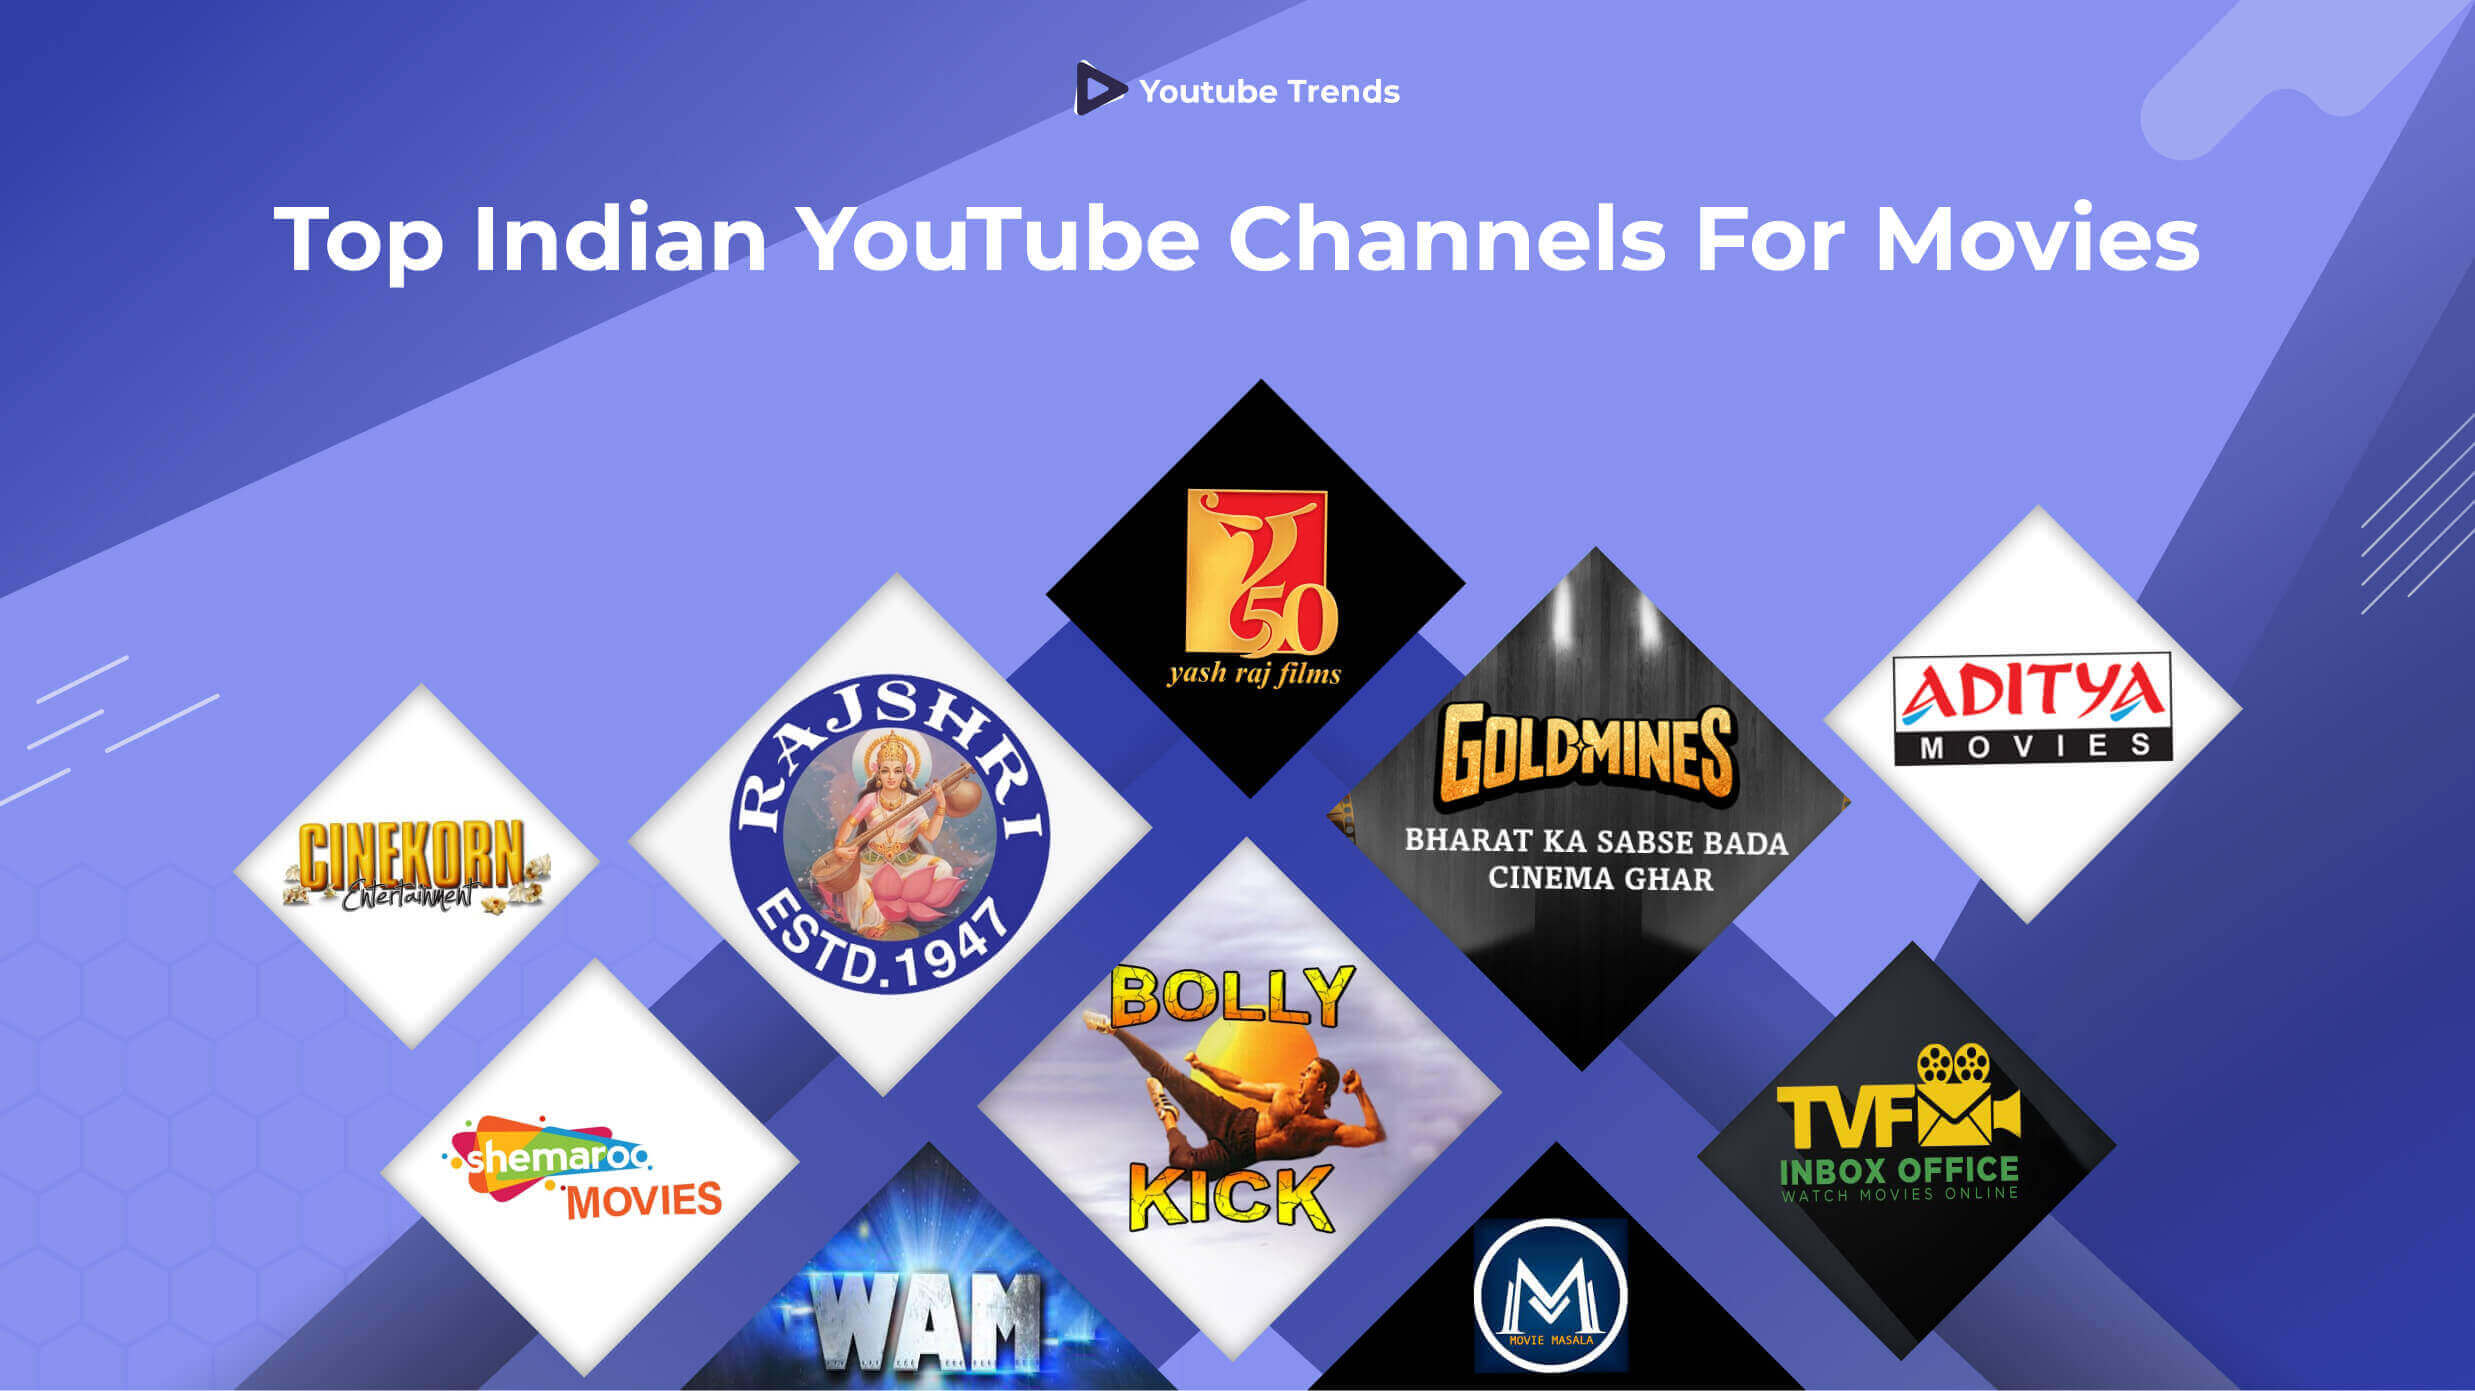 Top Indian YouTube channels for watching movies.